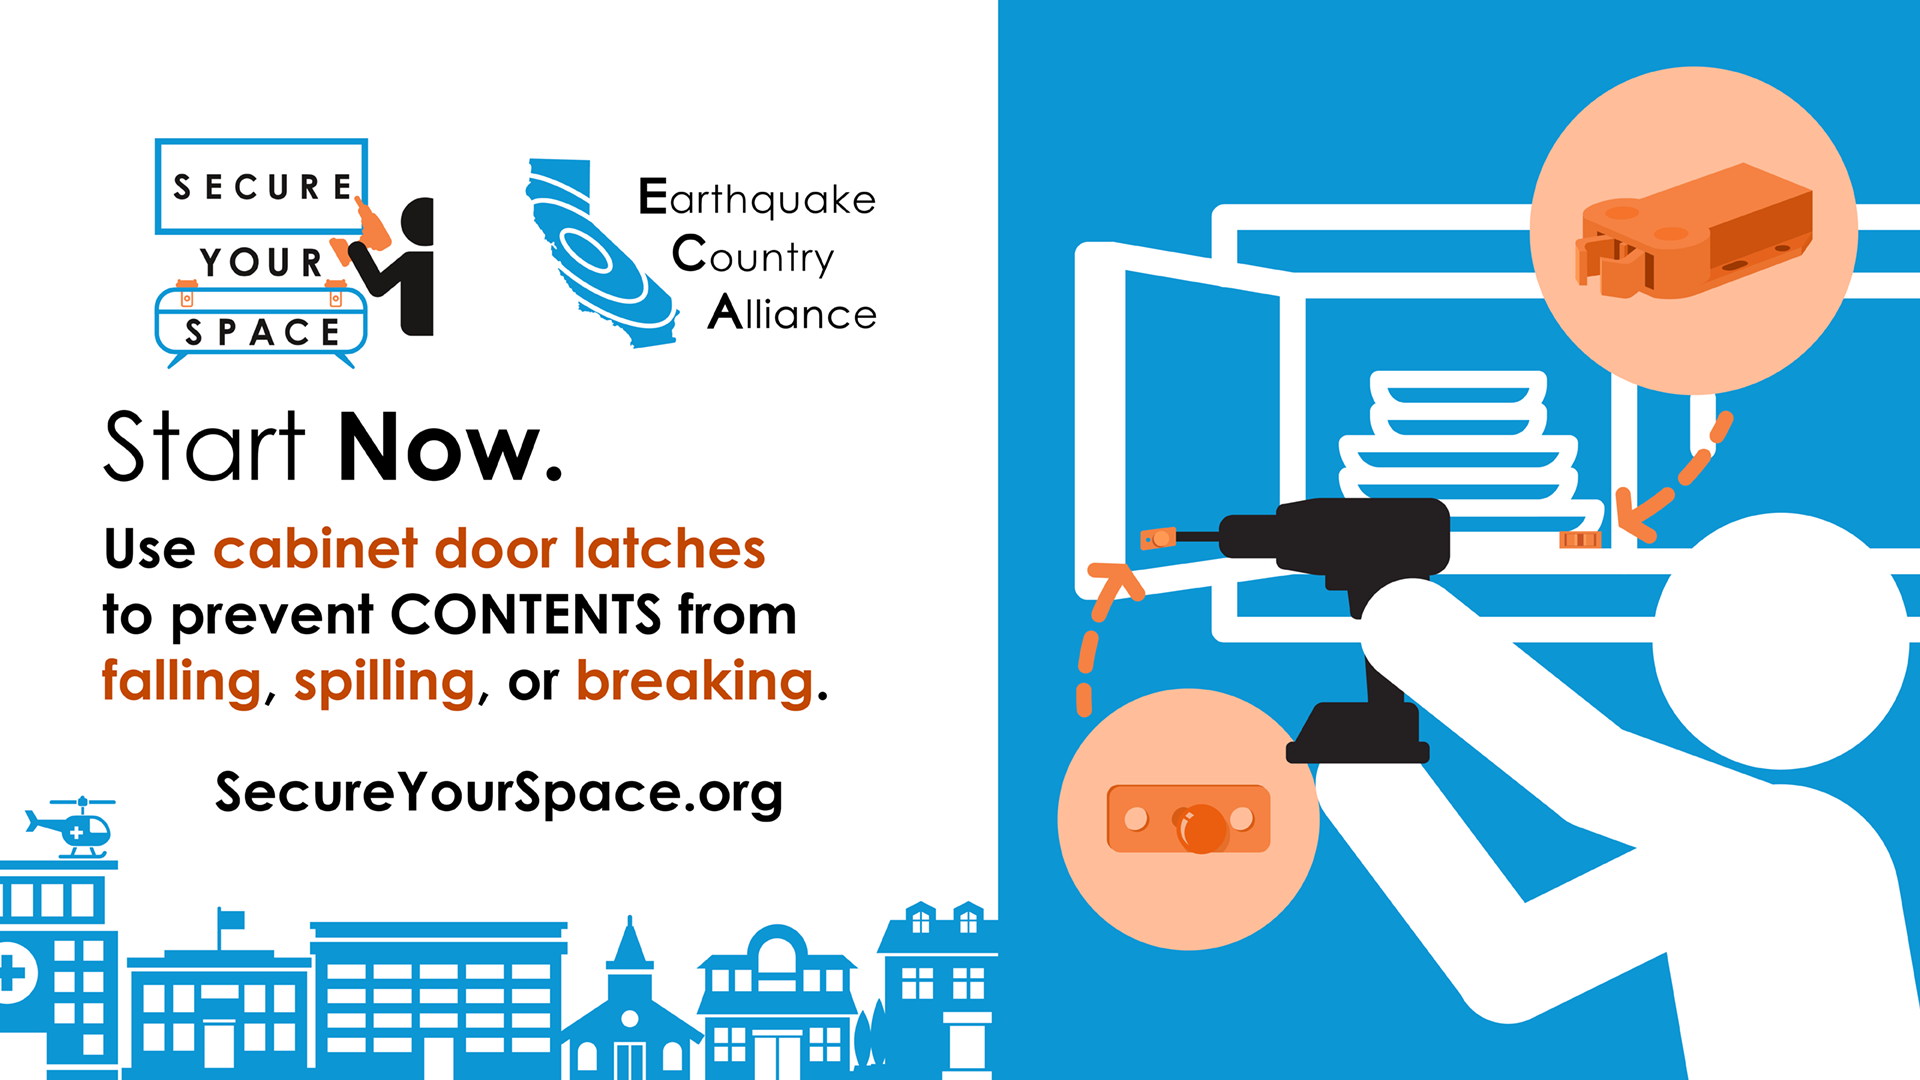 Graphic showing how to secure kitchen cabinets for earthquake shaking with cabinet door latches, and promoting SecureYourSpace.org.